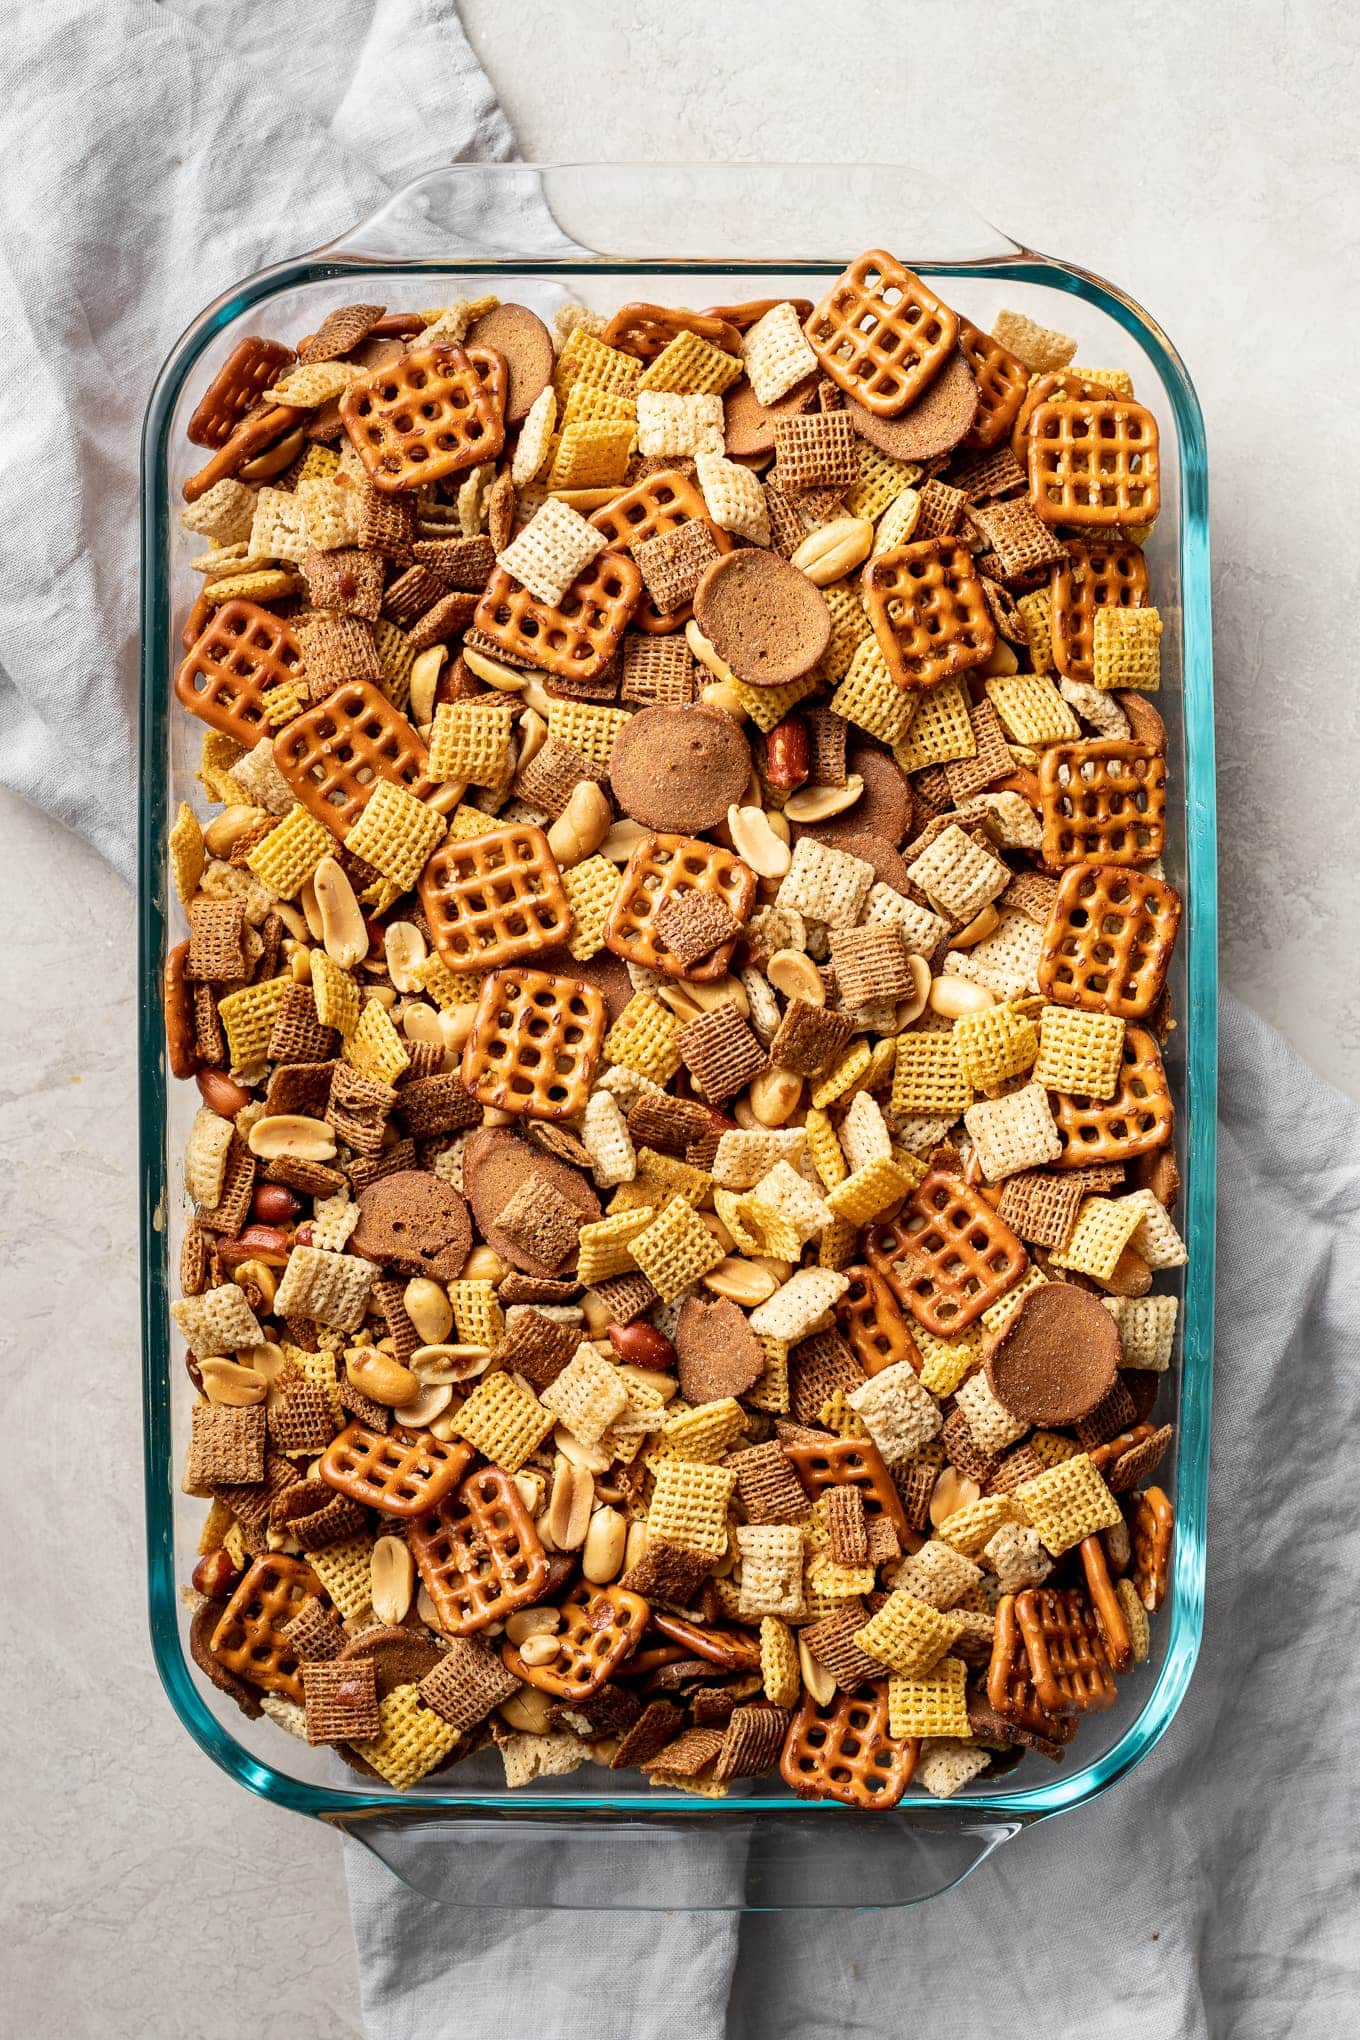 https://www.nourish-and-fete.com/wp-content/uploads/2018/01/rye-chip-chex-mix-1360px-2.jpg